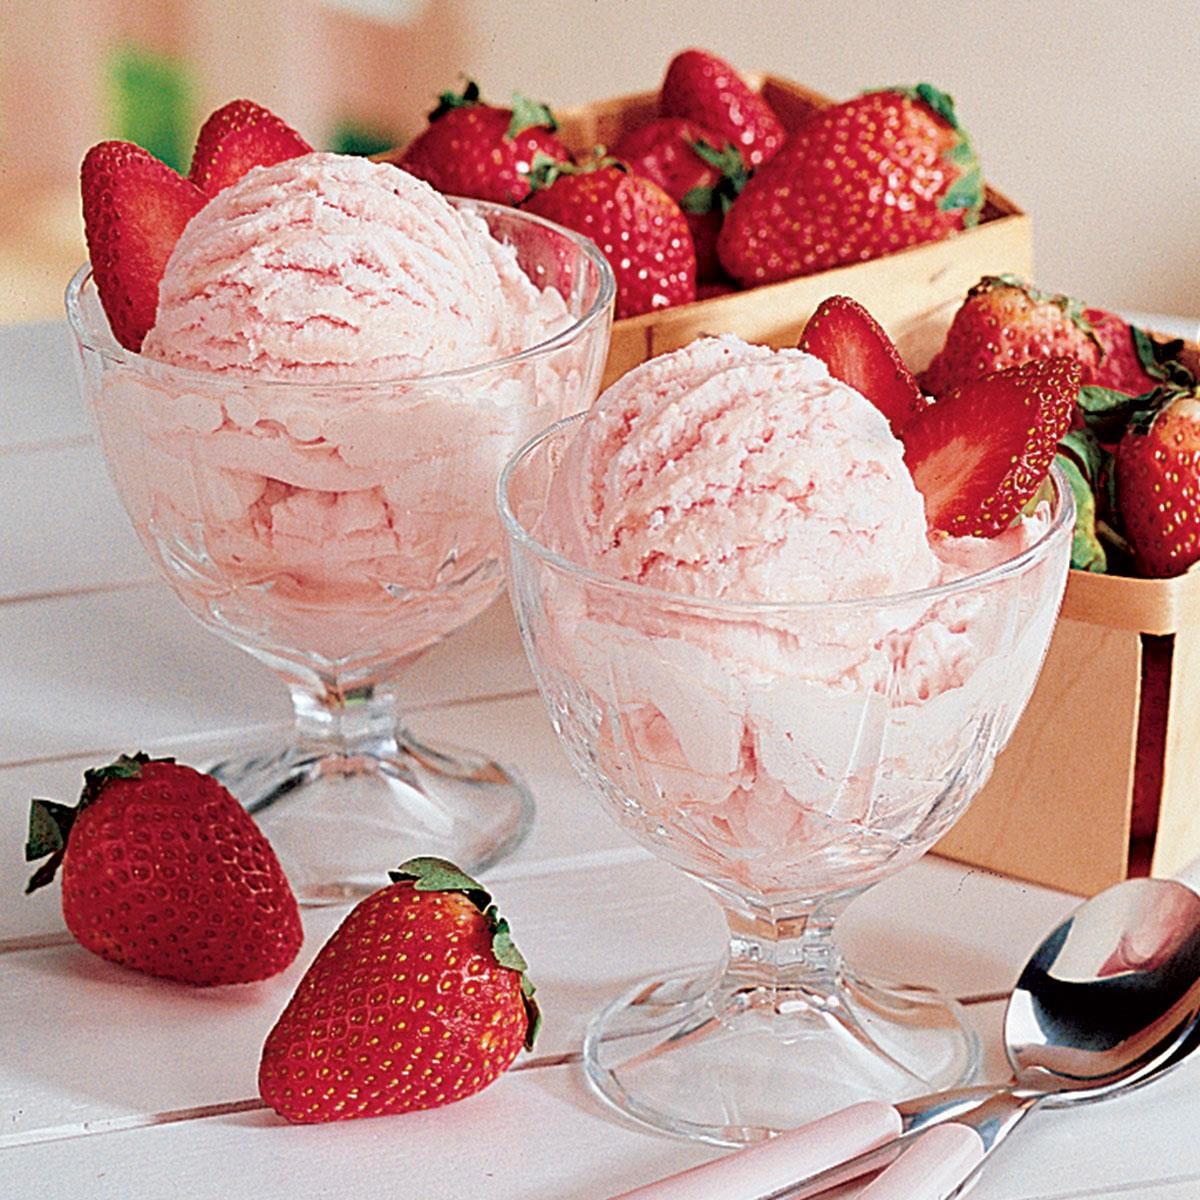 List 90+ Images pictures of strawberry ice cream Latest